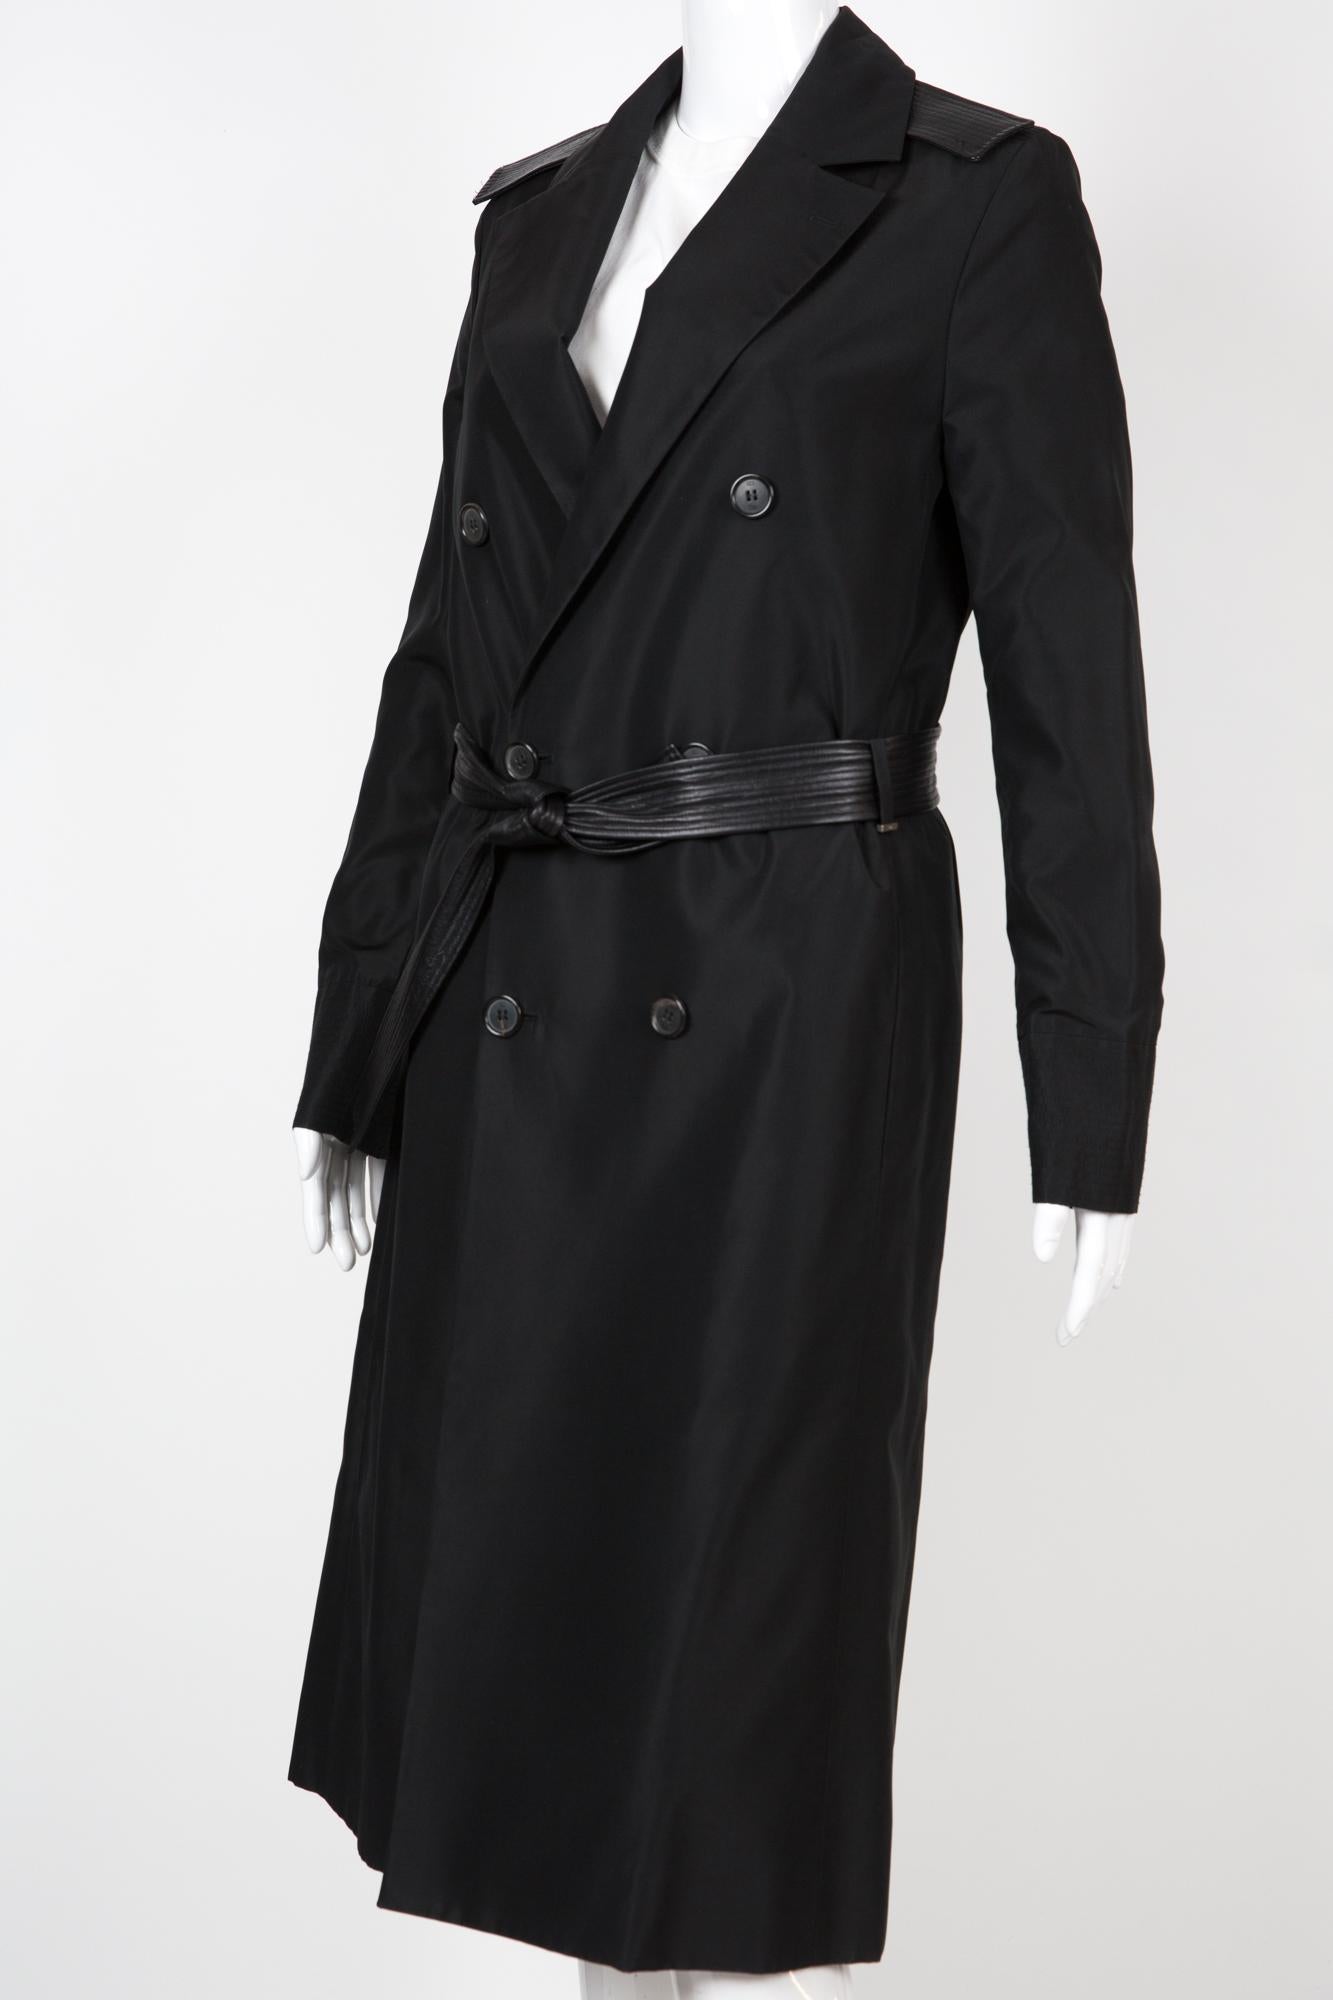 Women's or Men's Black Silk Trench By Hedi Slimane For Dior Homme